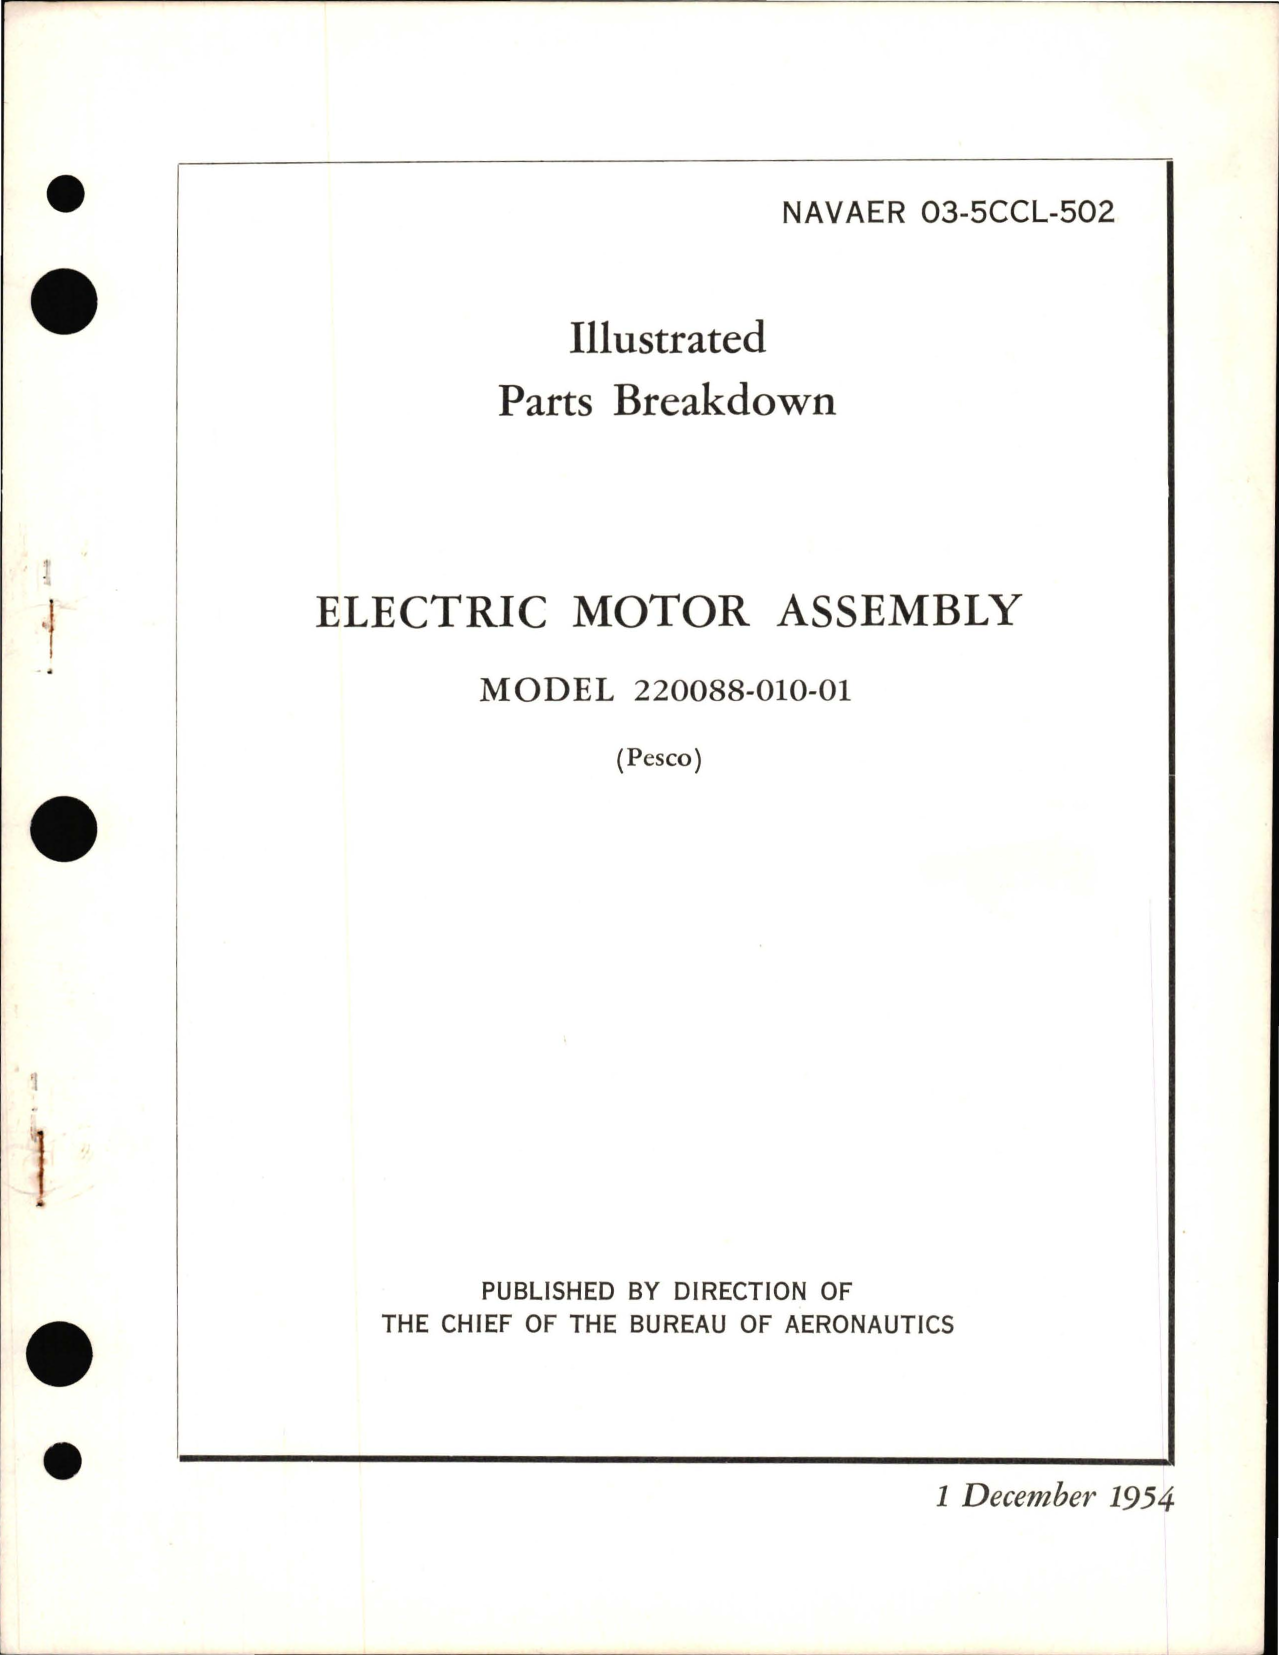 Sample page 1 from AirCorps Library document: Illustrated Parts Breakdown for Electric Motor Assembly - Model 220088-010-01 